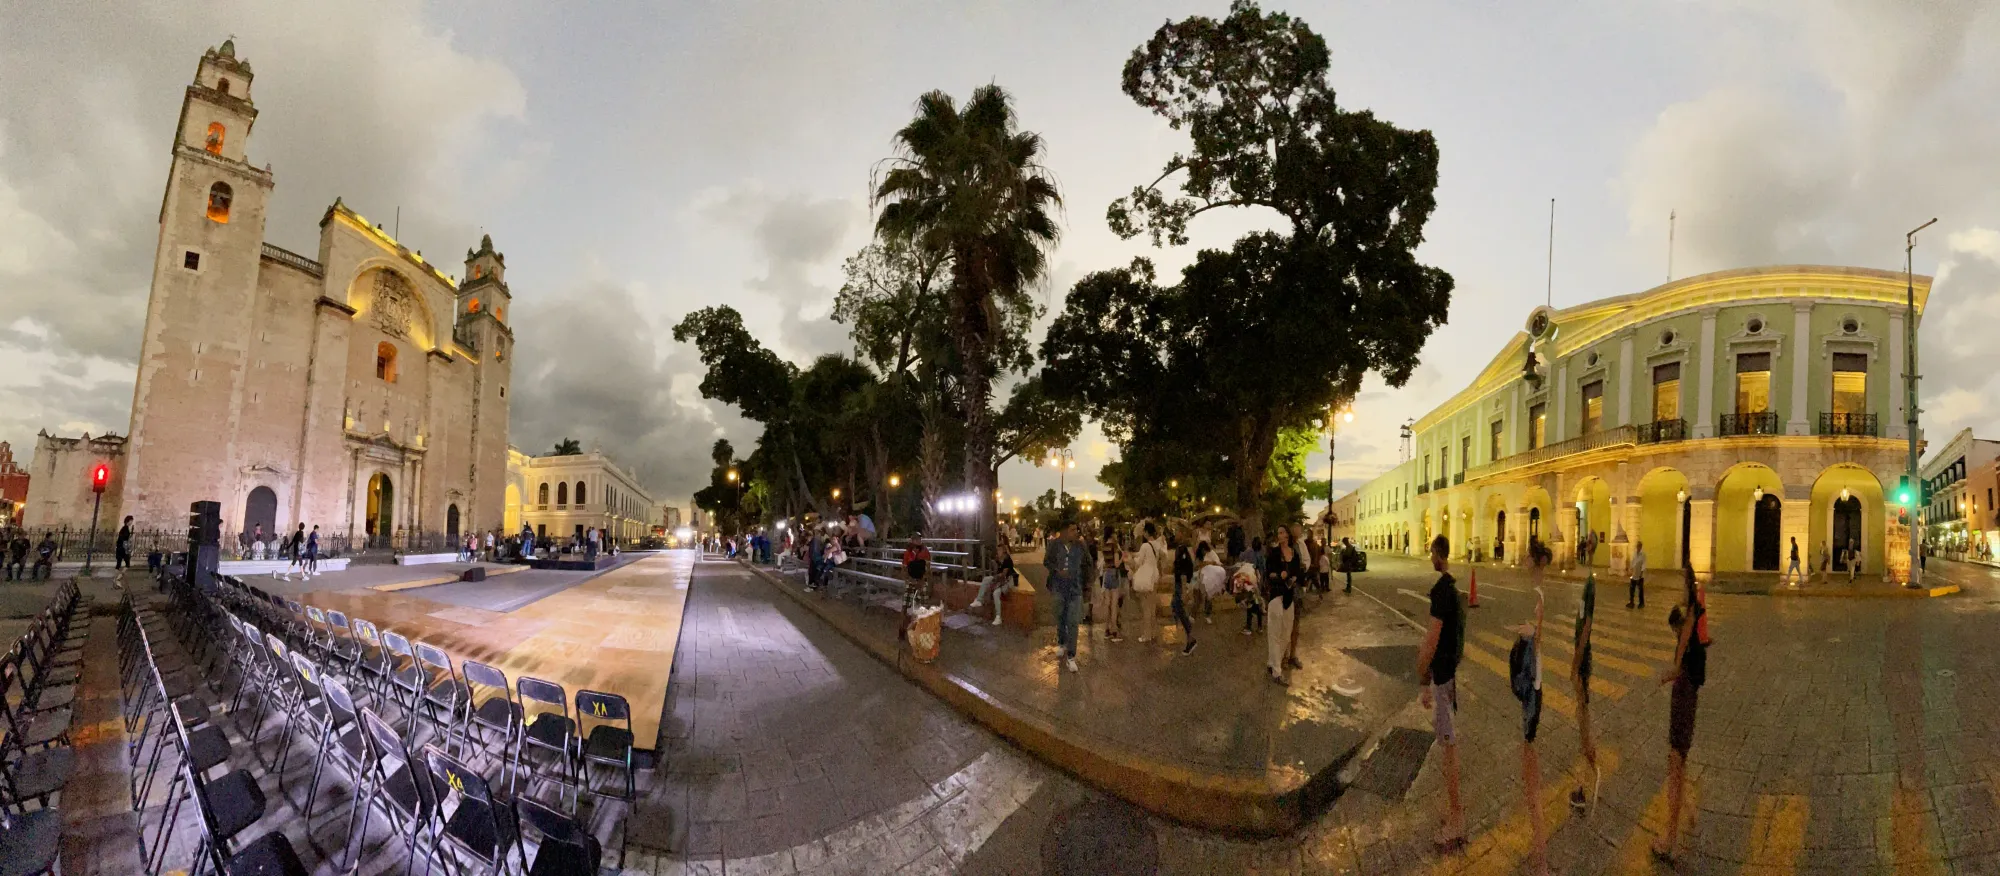 A wide angle panorama shows the Mérida cathedral, pre-concert, Plaza Grande and historic building.